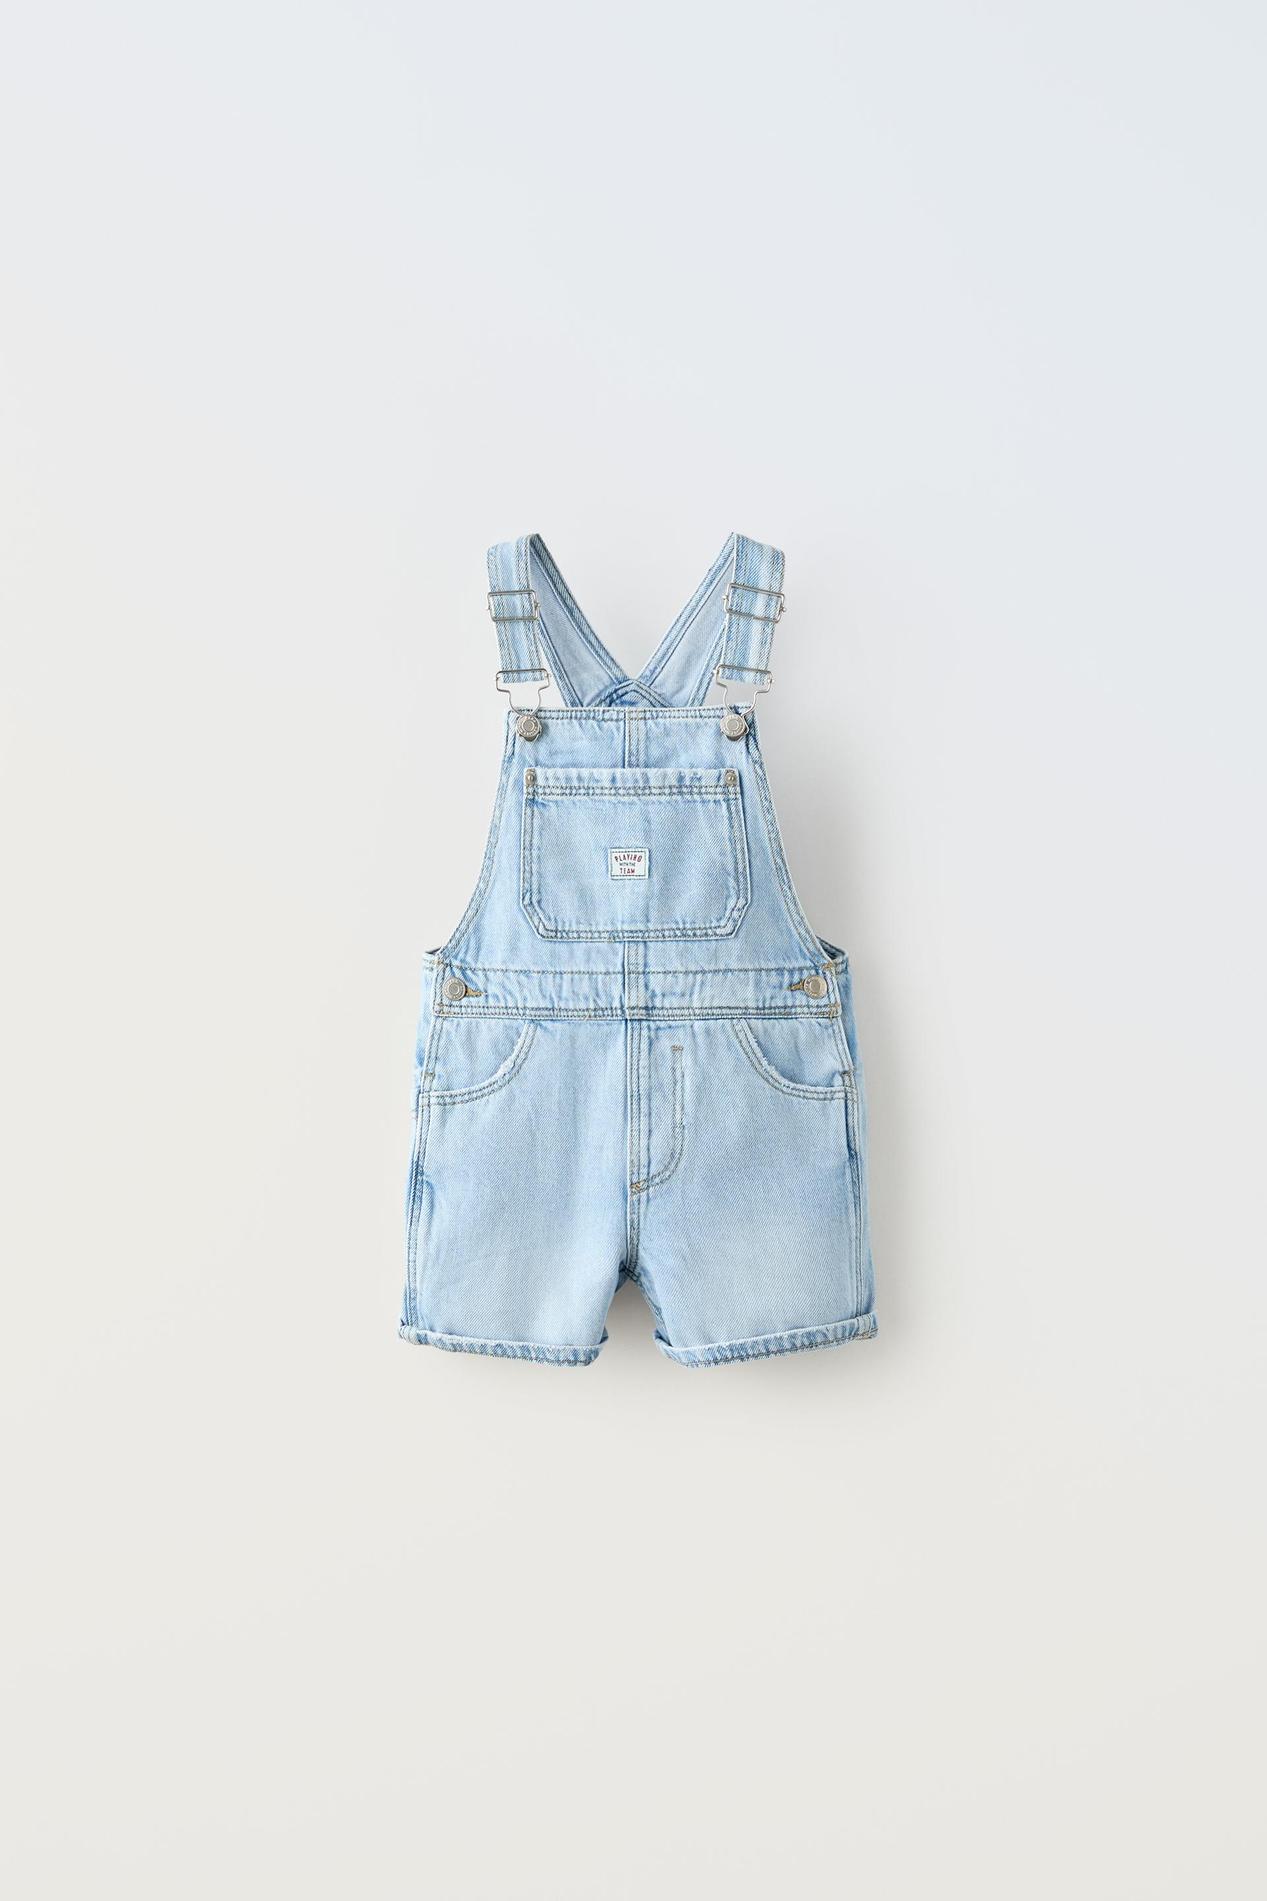 ZARAにおける￥3290でのSHORT DUNGAREES WITH BUCKLES AND LABELのオファー